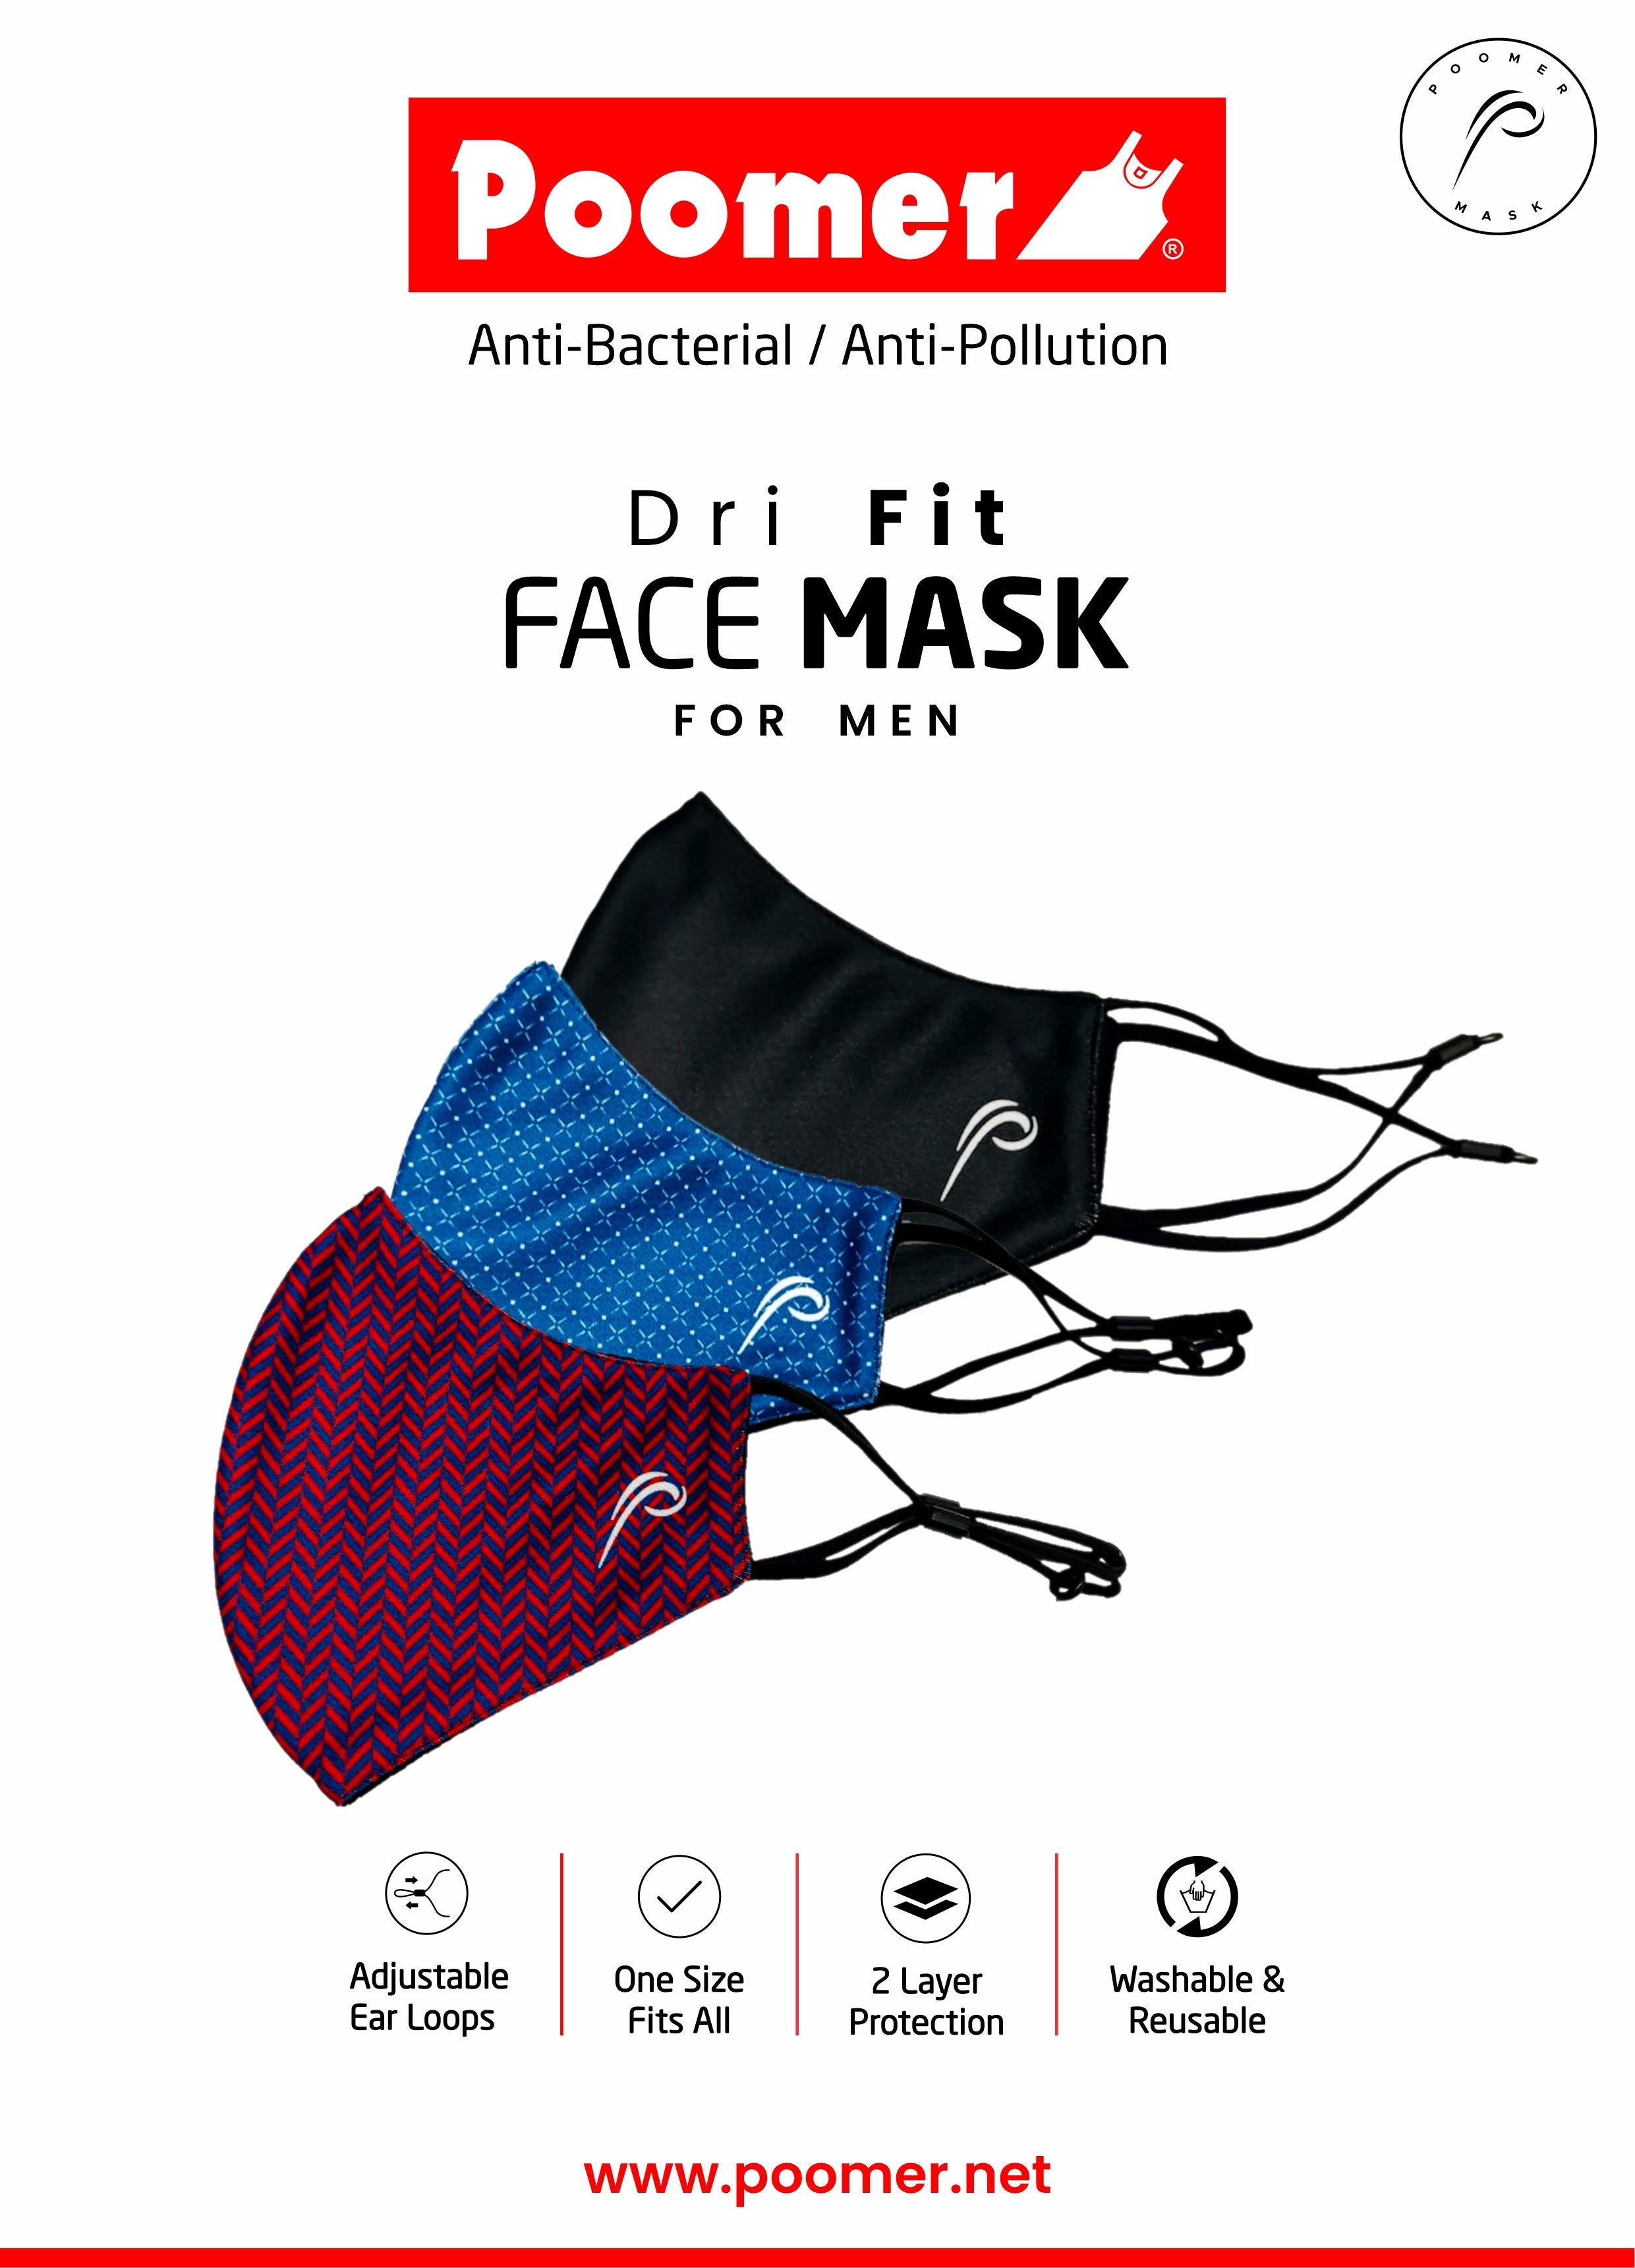 Poomer Dri Fit Face Mask - 2 layer Anti-Bacterial & Anti-Pollution Face Mask (Pack of 3)